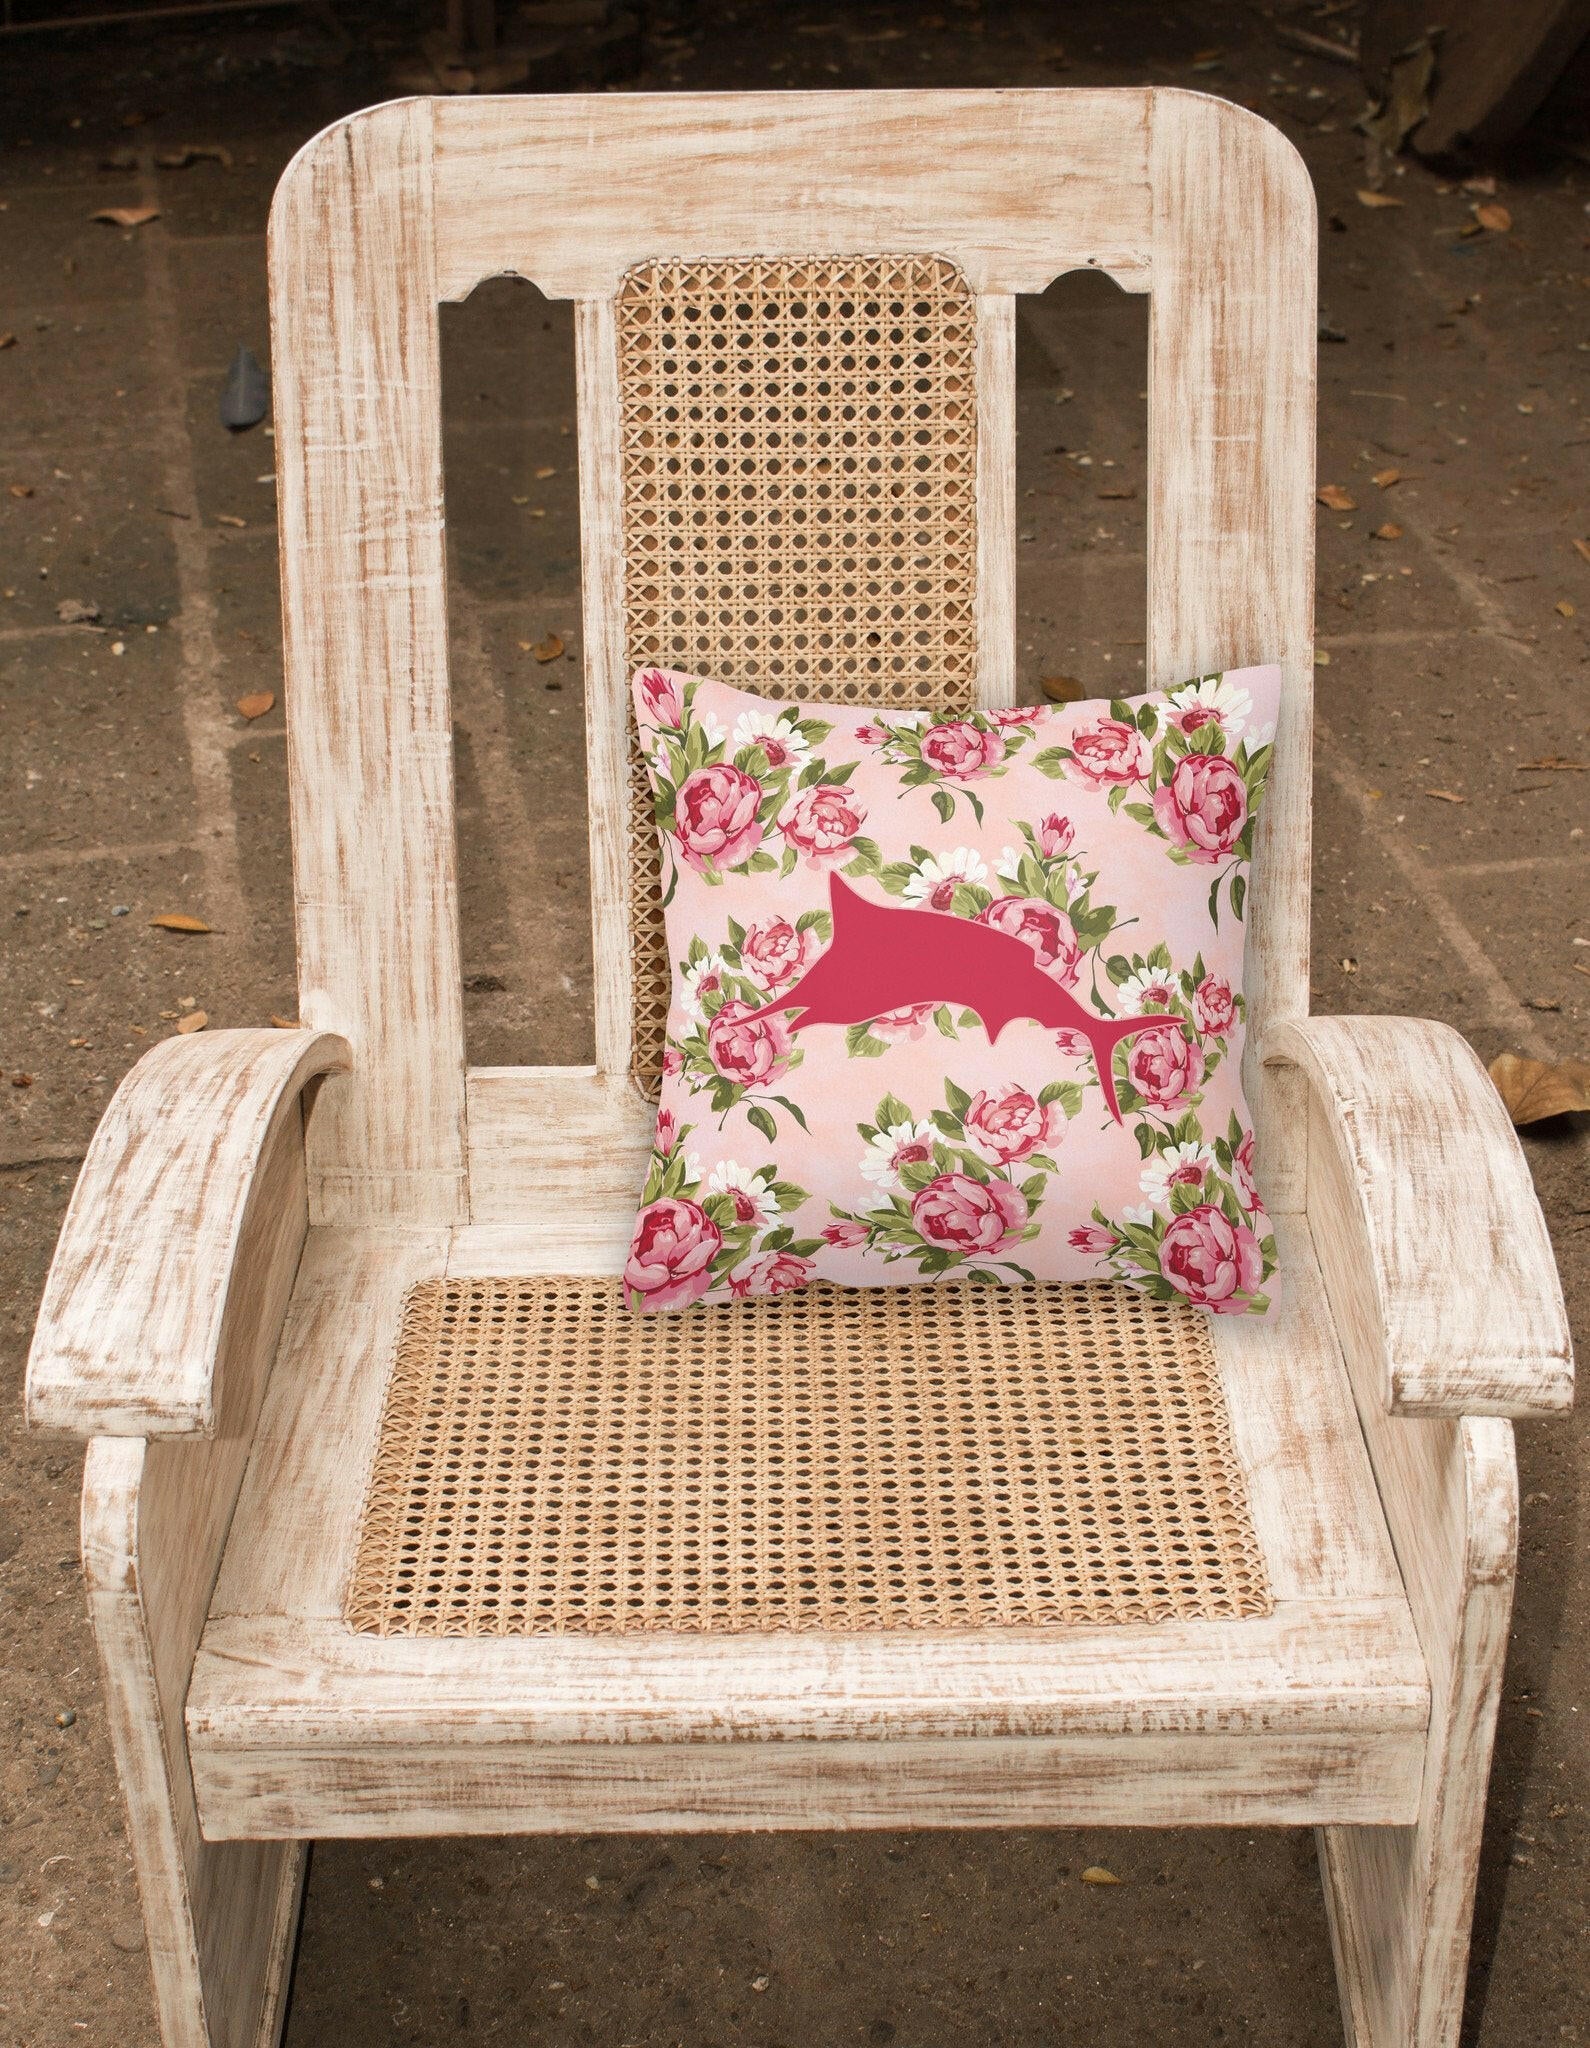 Fish - Marlin Shabby Chic Pink Roses  Fabric Decorative Pillow BB1026-RS-PK-PW1414 - the-store.com